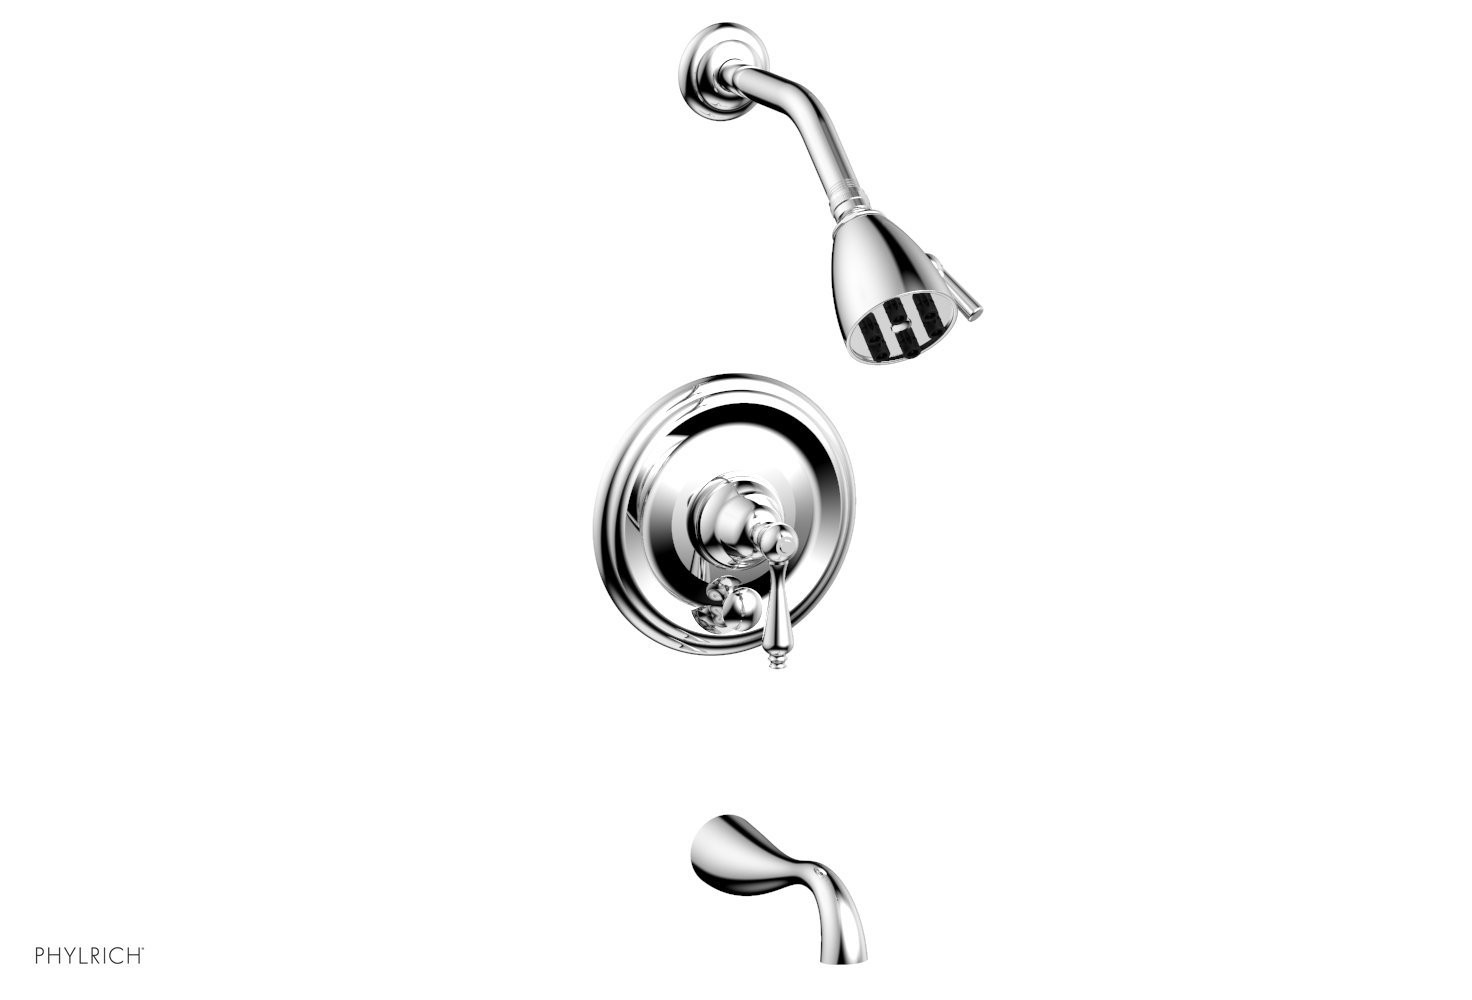 PHYLRICH DPB2100 REVERE & SAVANNAH WALL MOUNT PRESSURE BALANCE TUB AND SHOWER SET WITH LEVER HANDLE